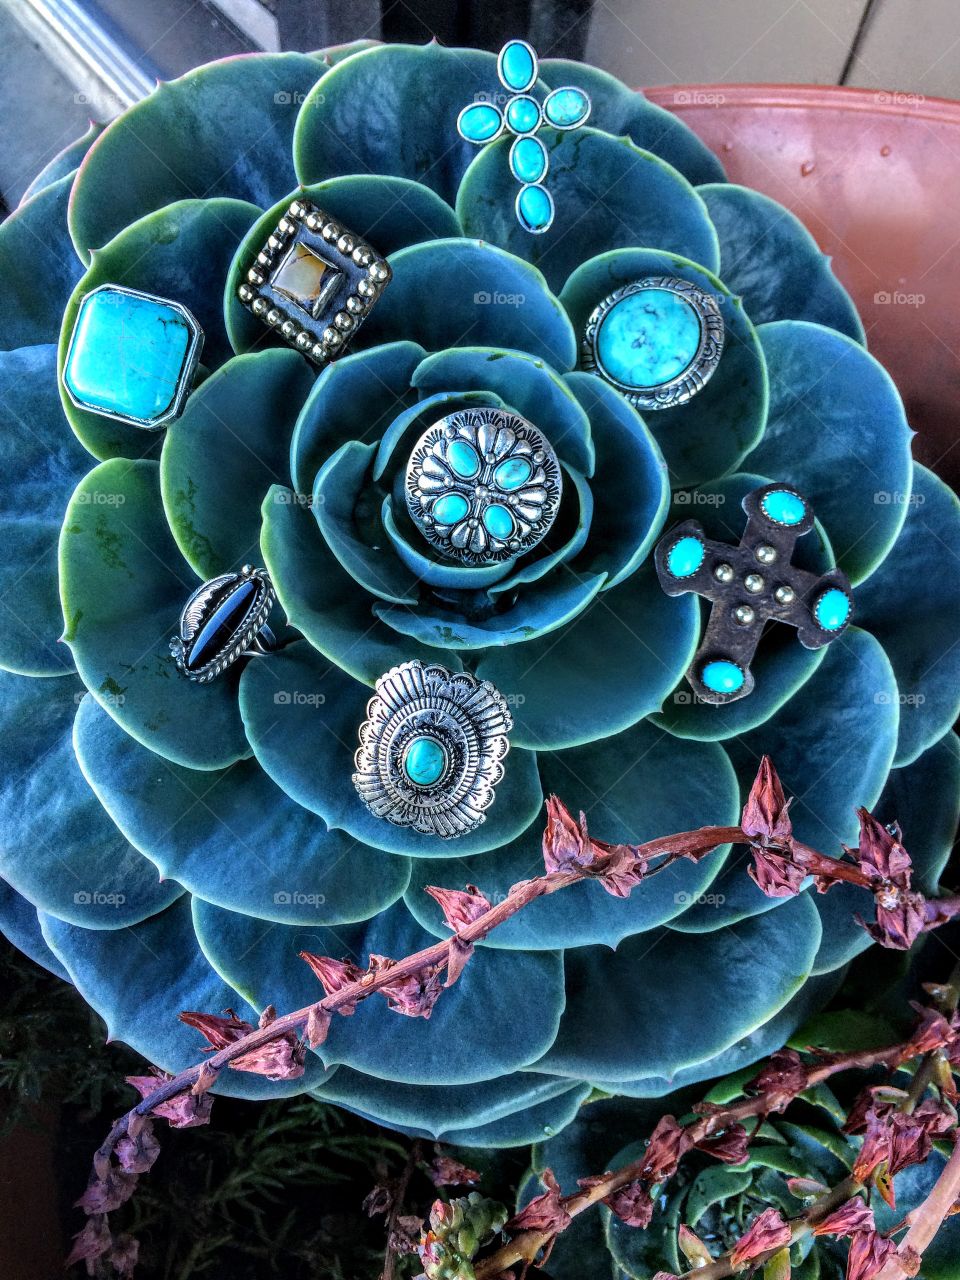 WHO DOESN'T LIVE CACTUS AND RINGS!? 